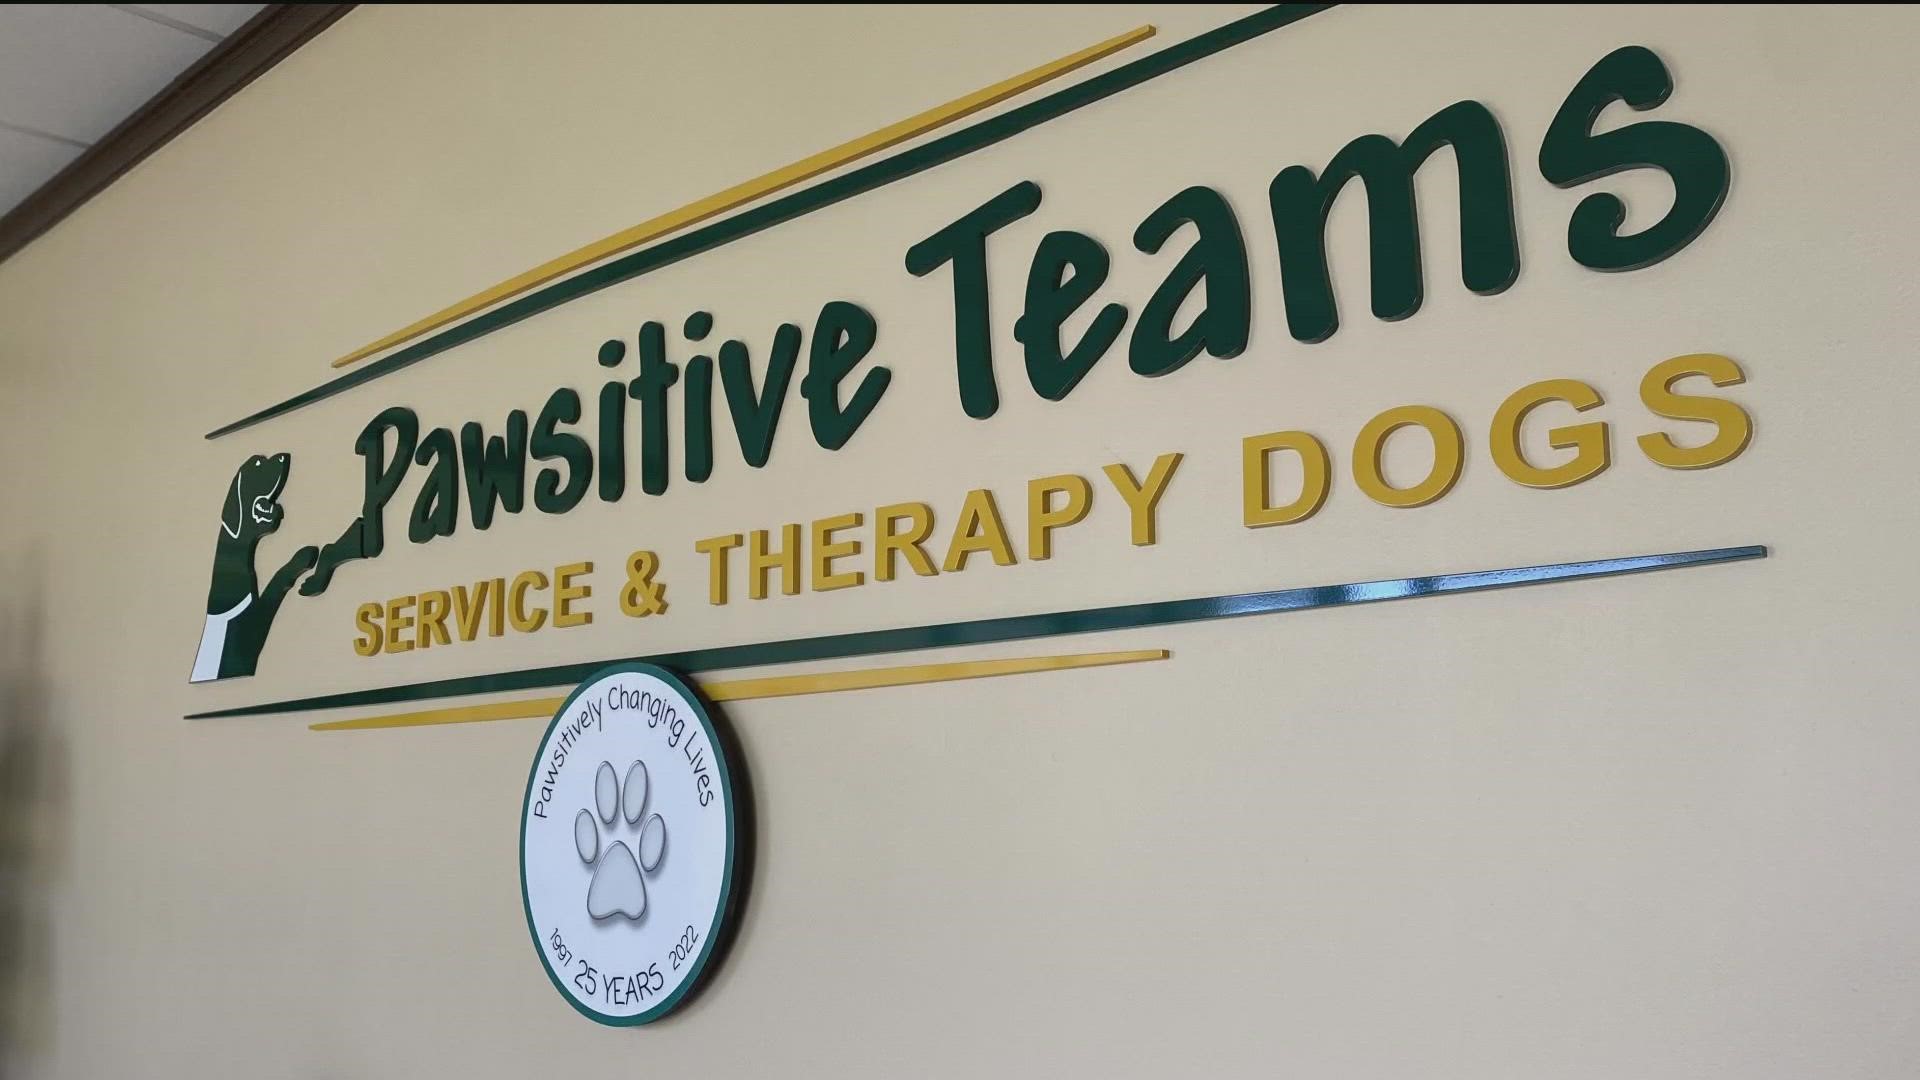 Pawsitive Teams celebrates 25 years of success while looking for new volunteers.